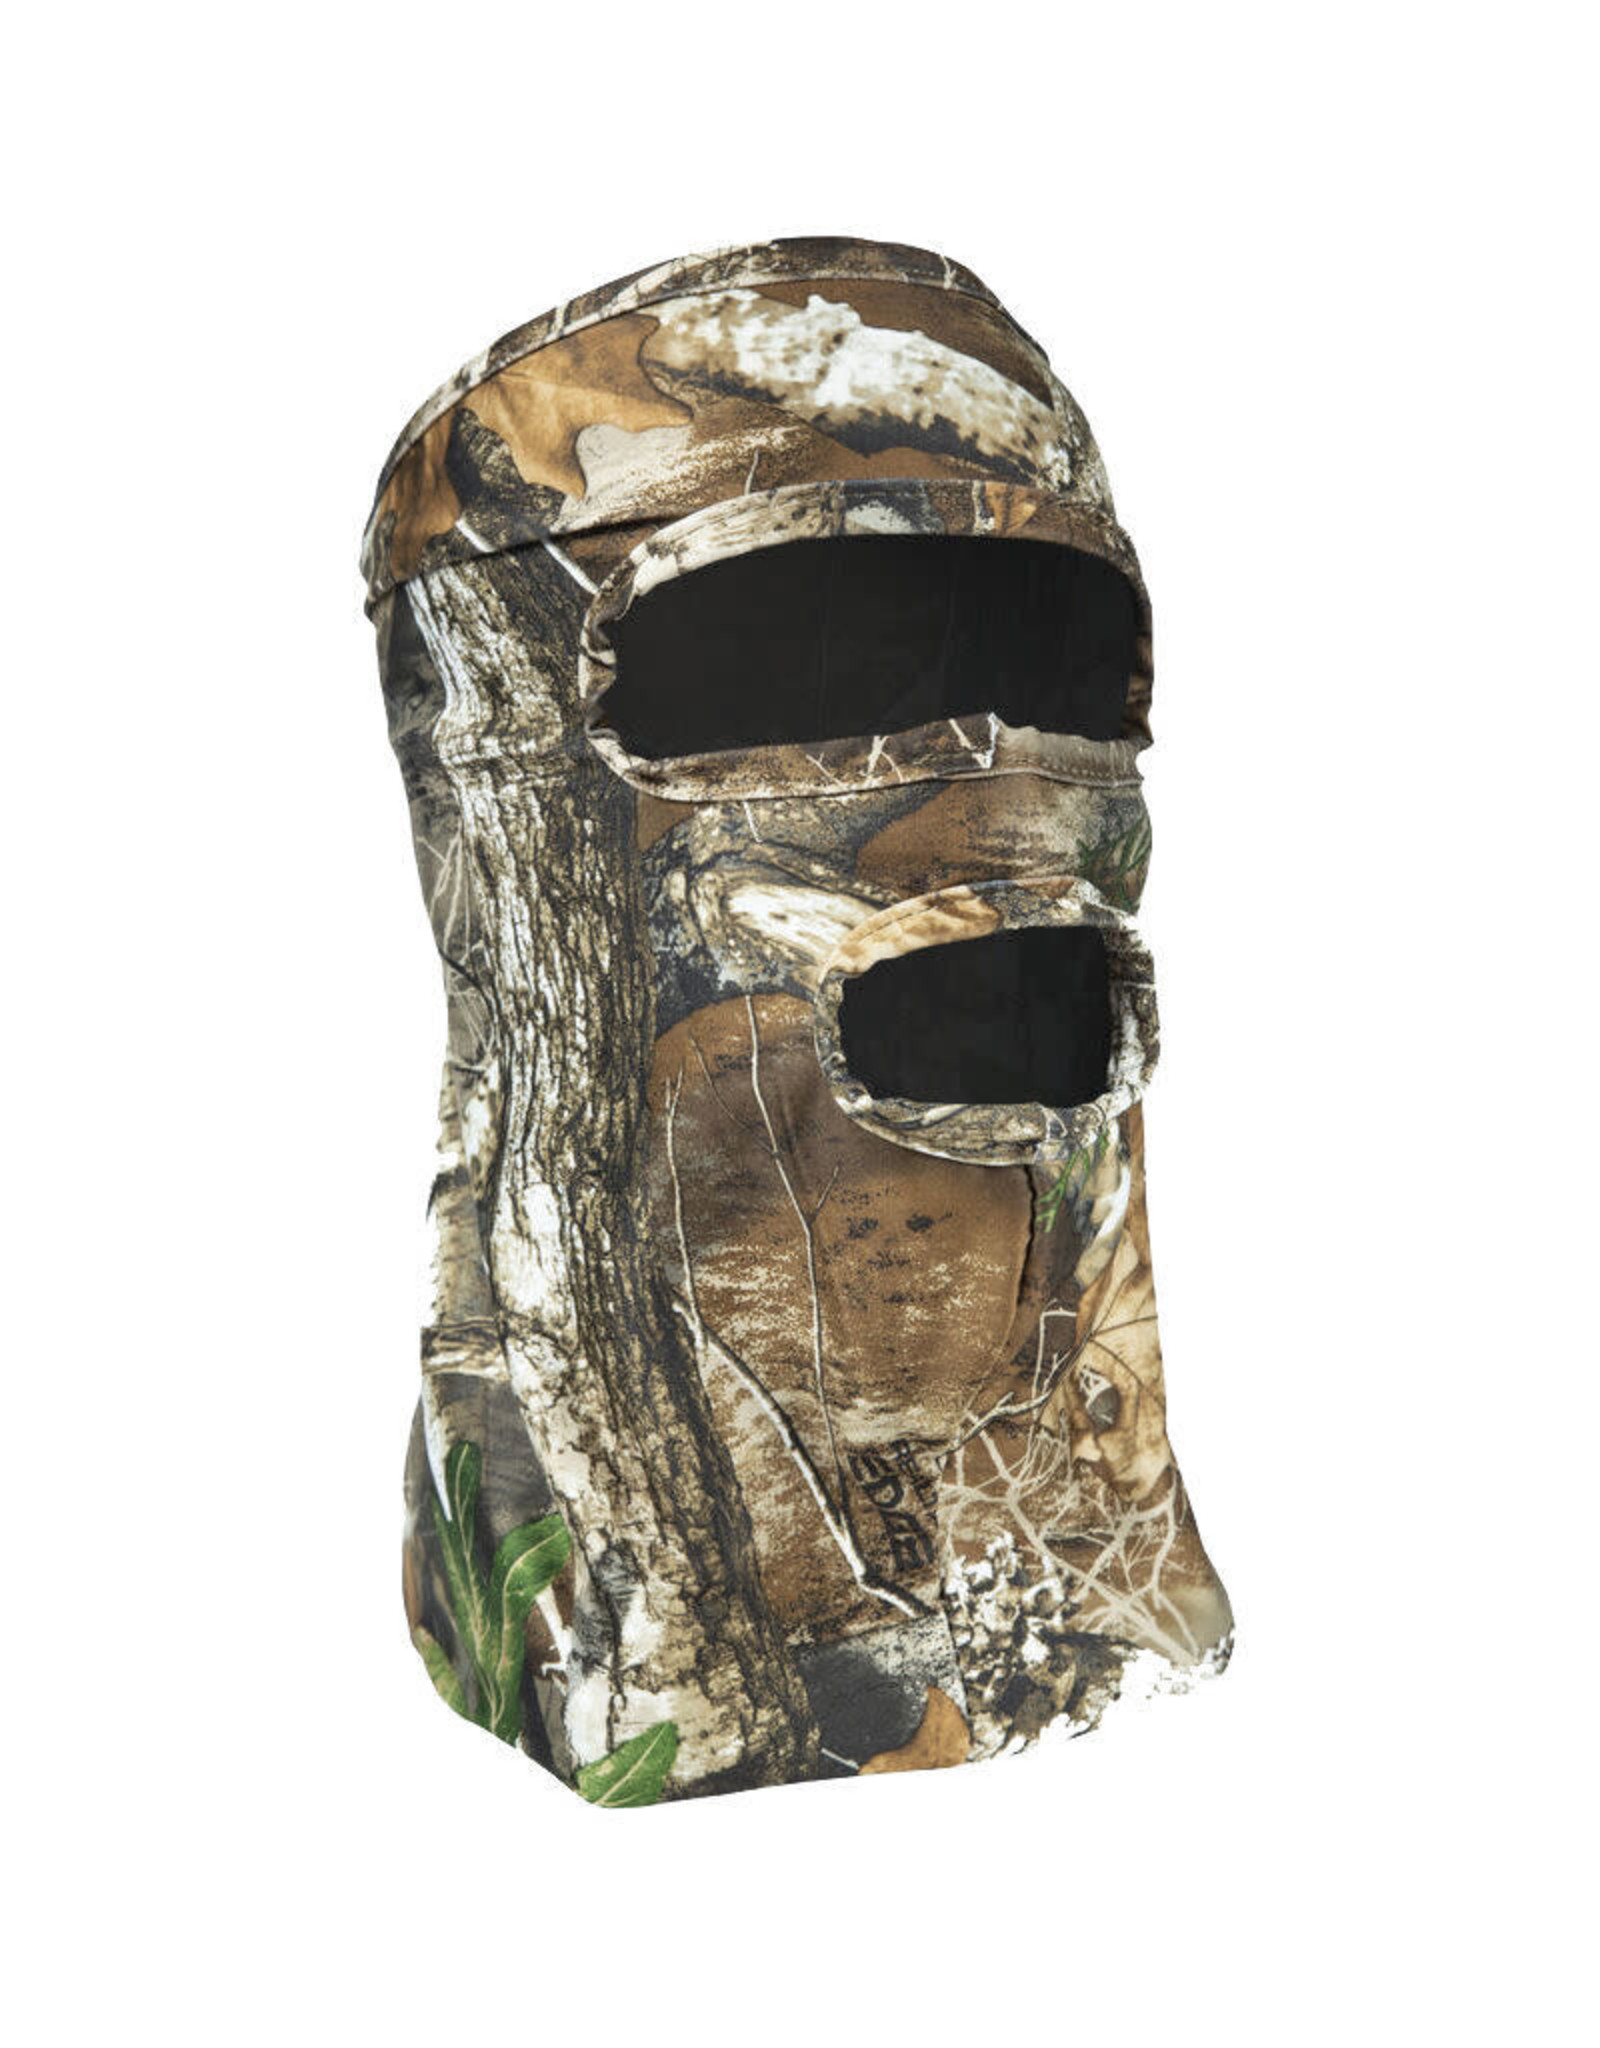 PRIMOS Primos Hunting Realtree Edge Camo Stretch Fit 3/4 Face Mask